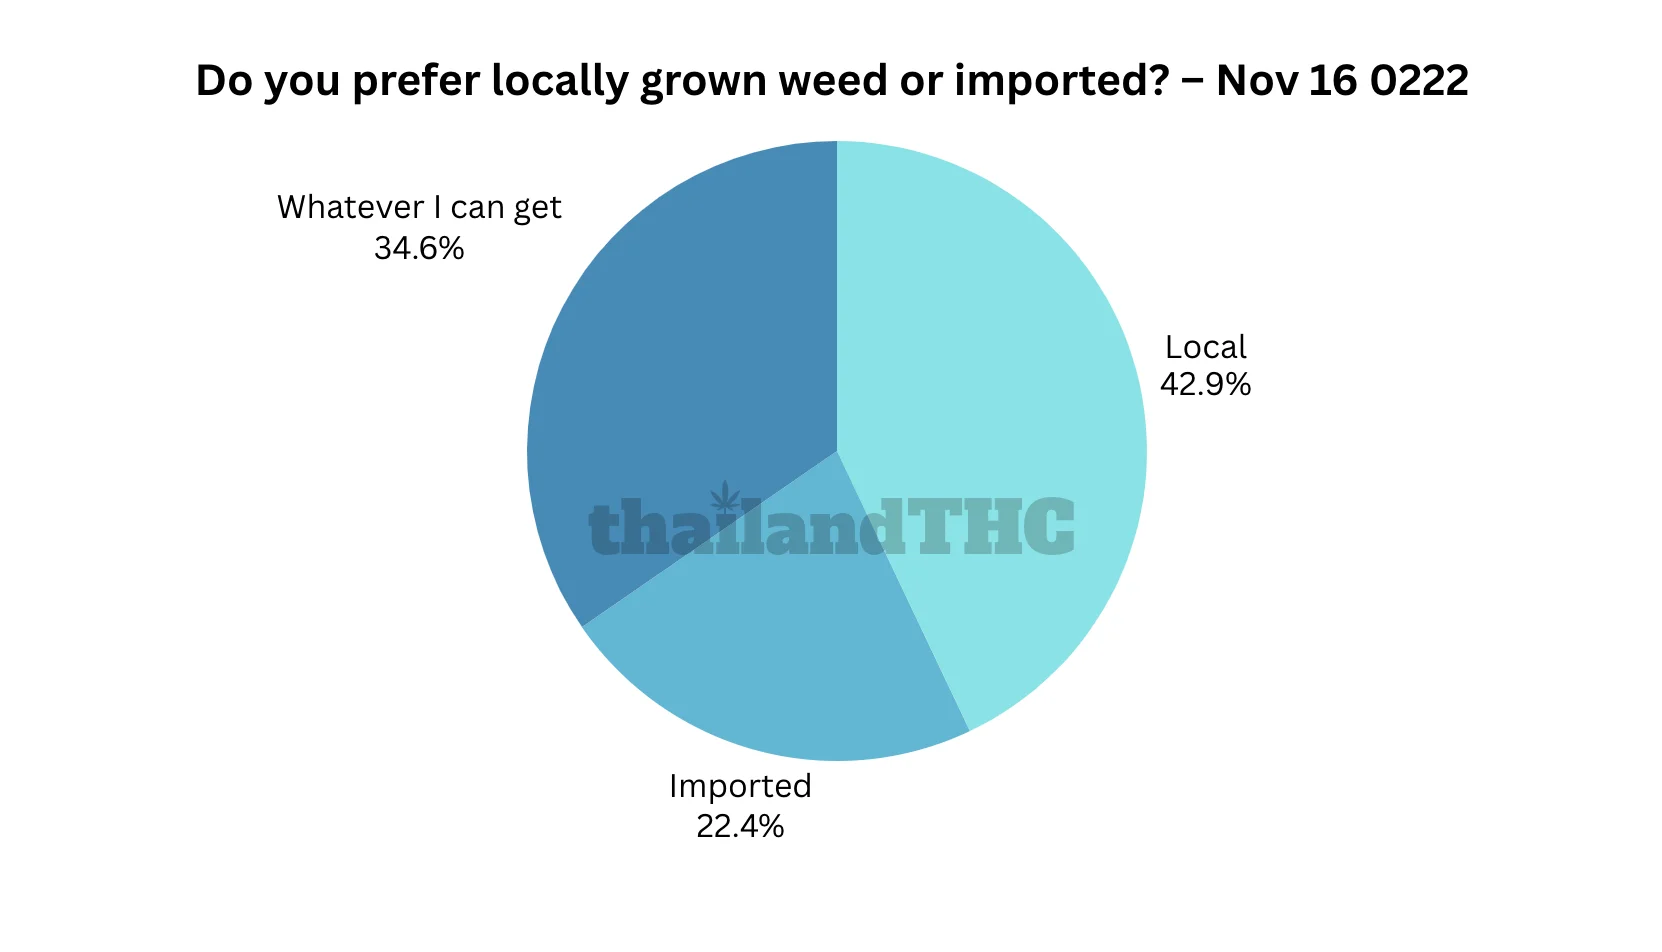 Do you prefer locally grown weed or imported?